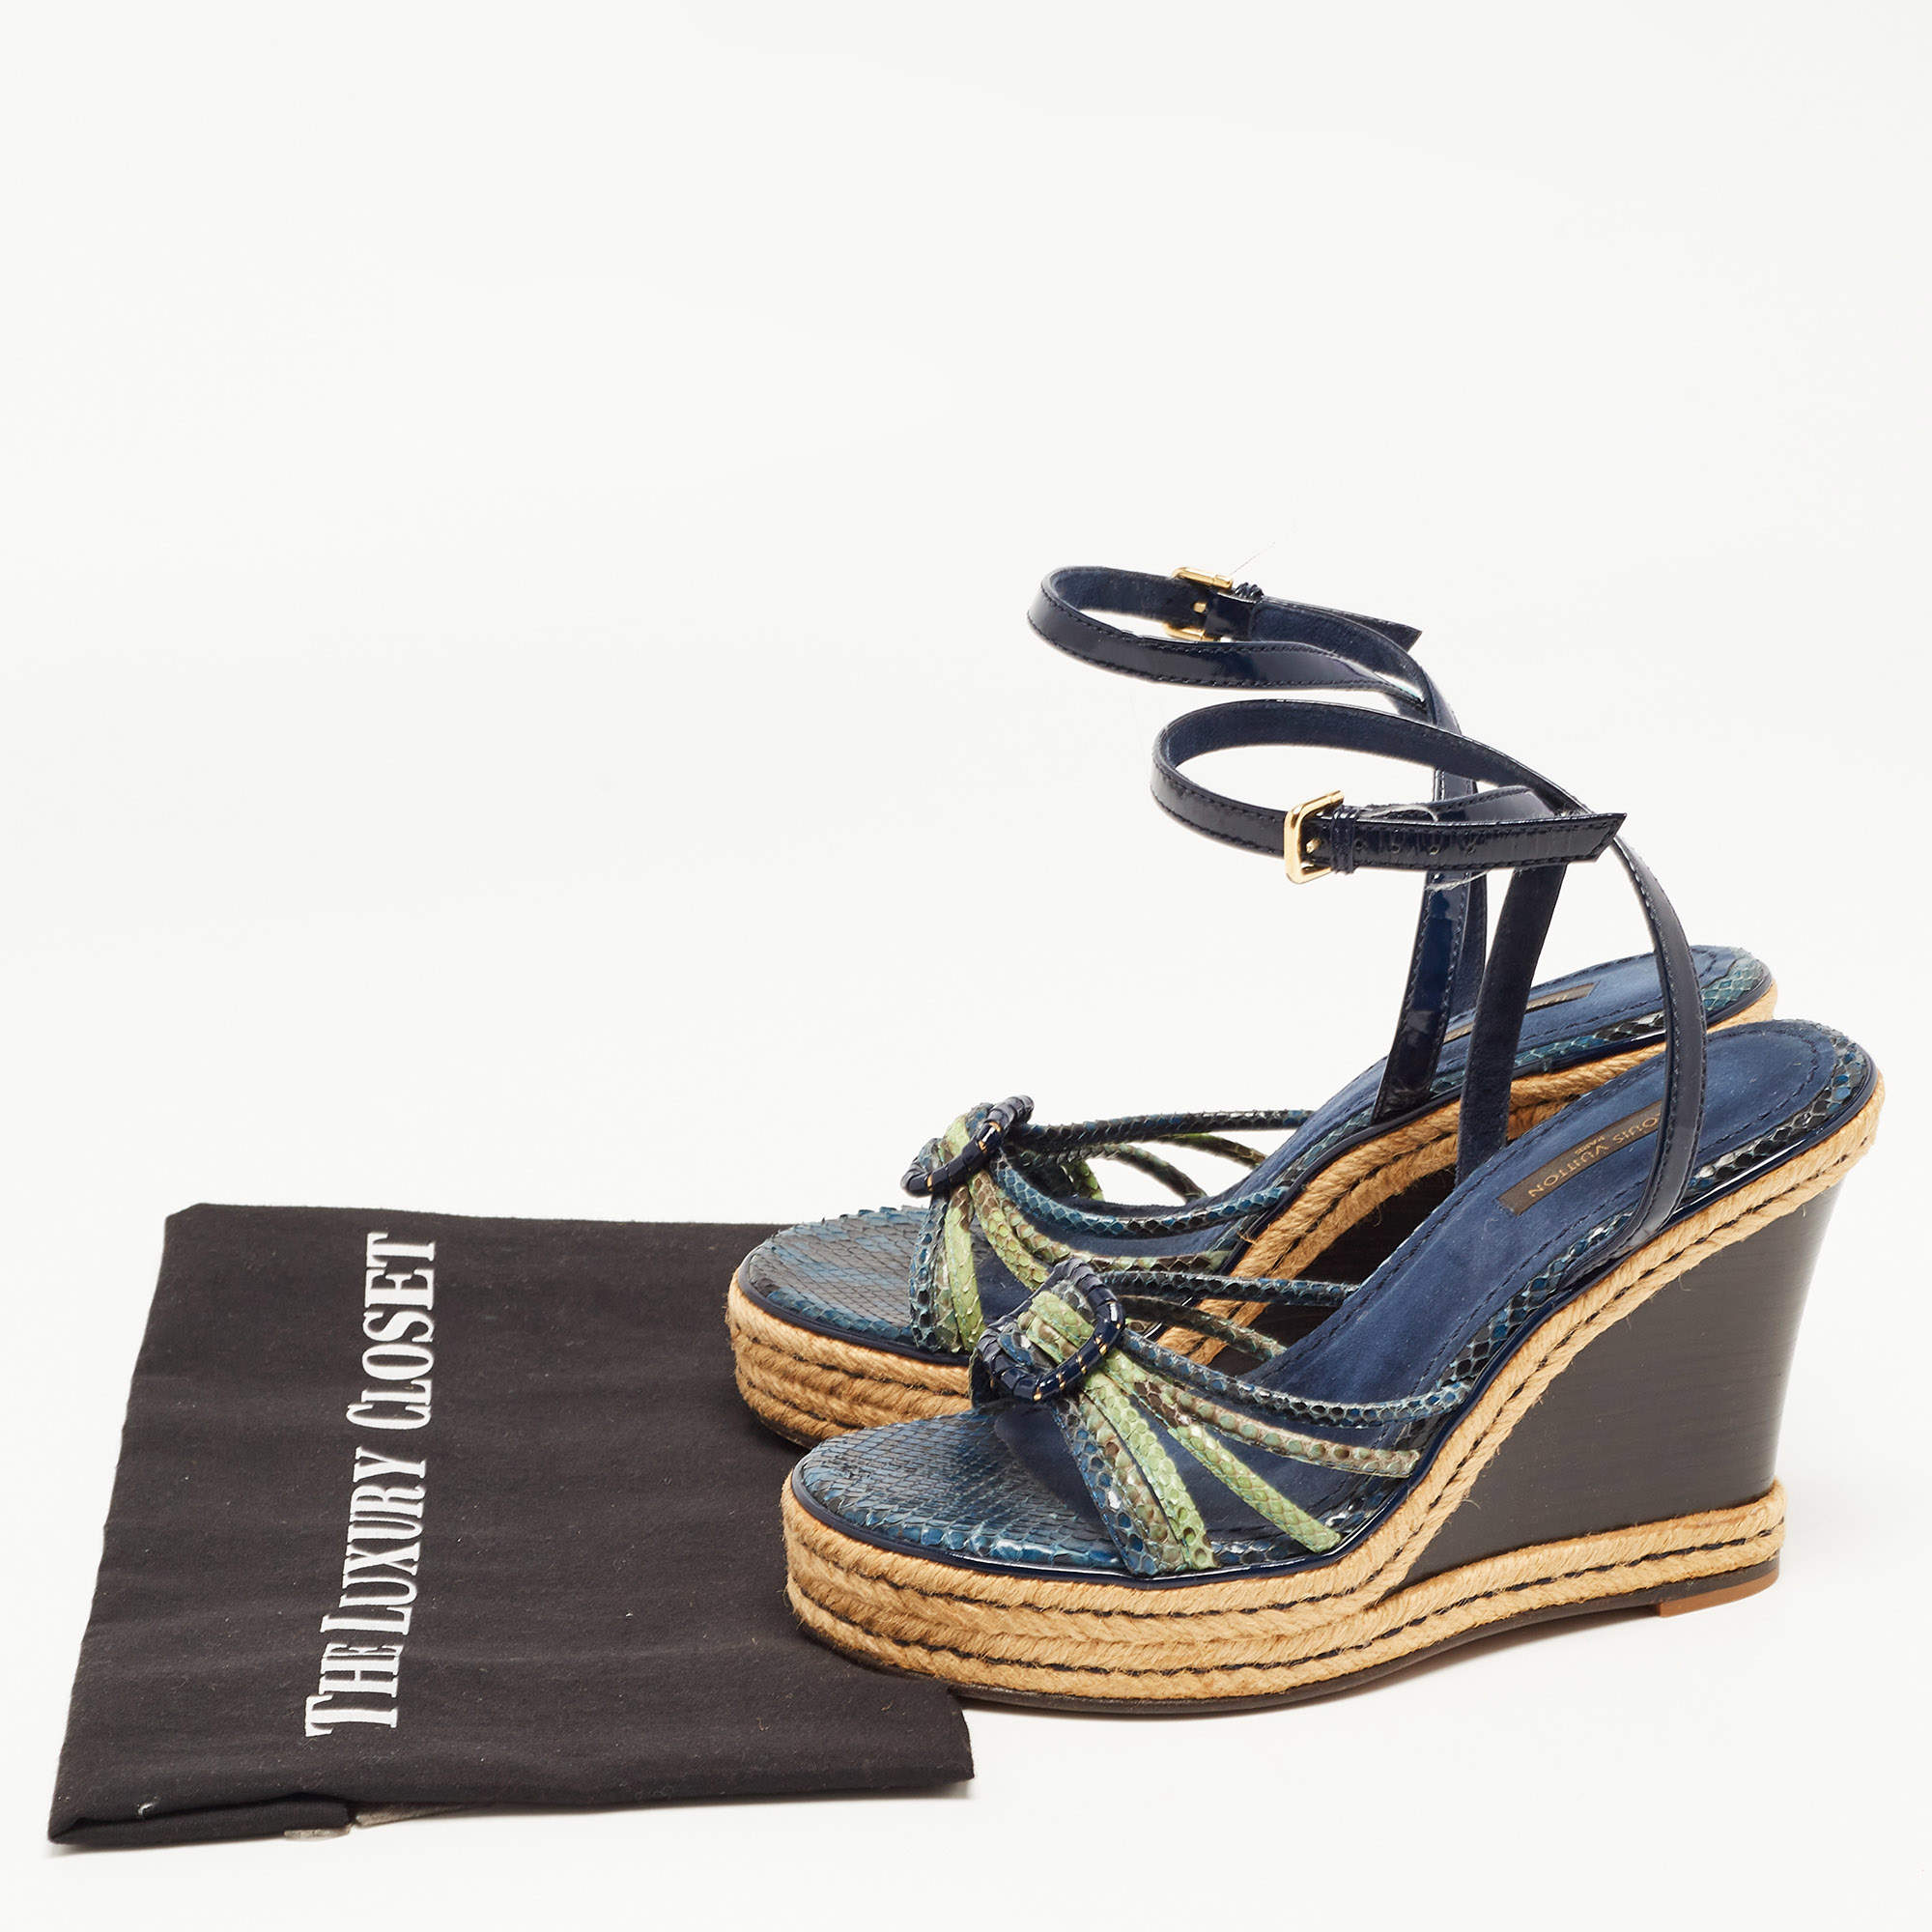 Louis Vuitton Navy Blue/Green Snakeskin and Patent Leather Wedge